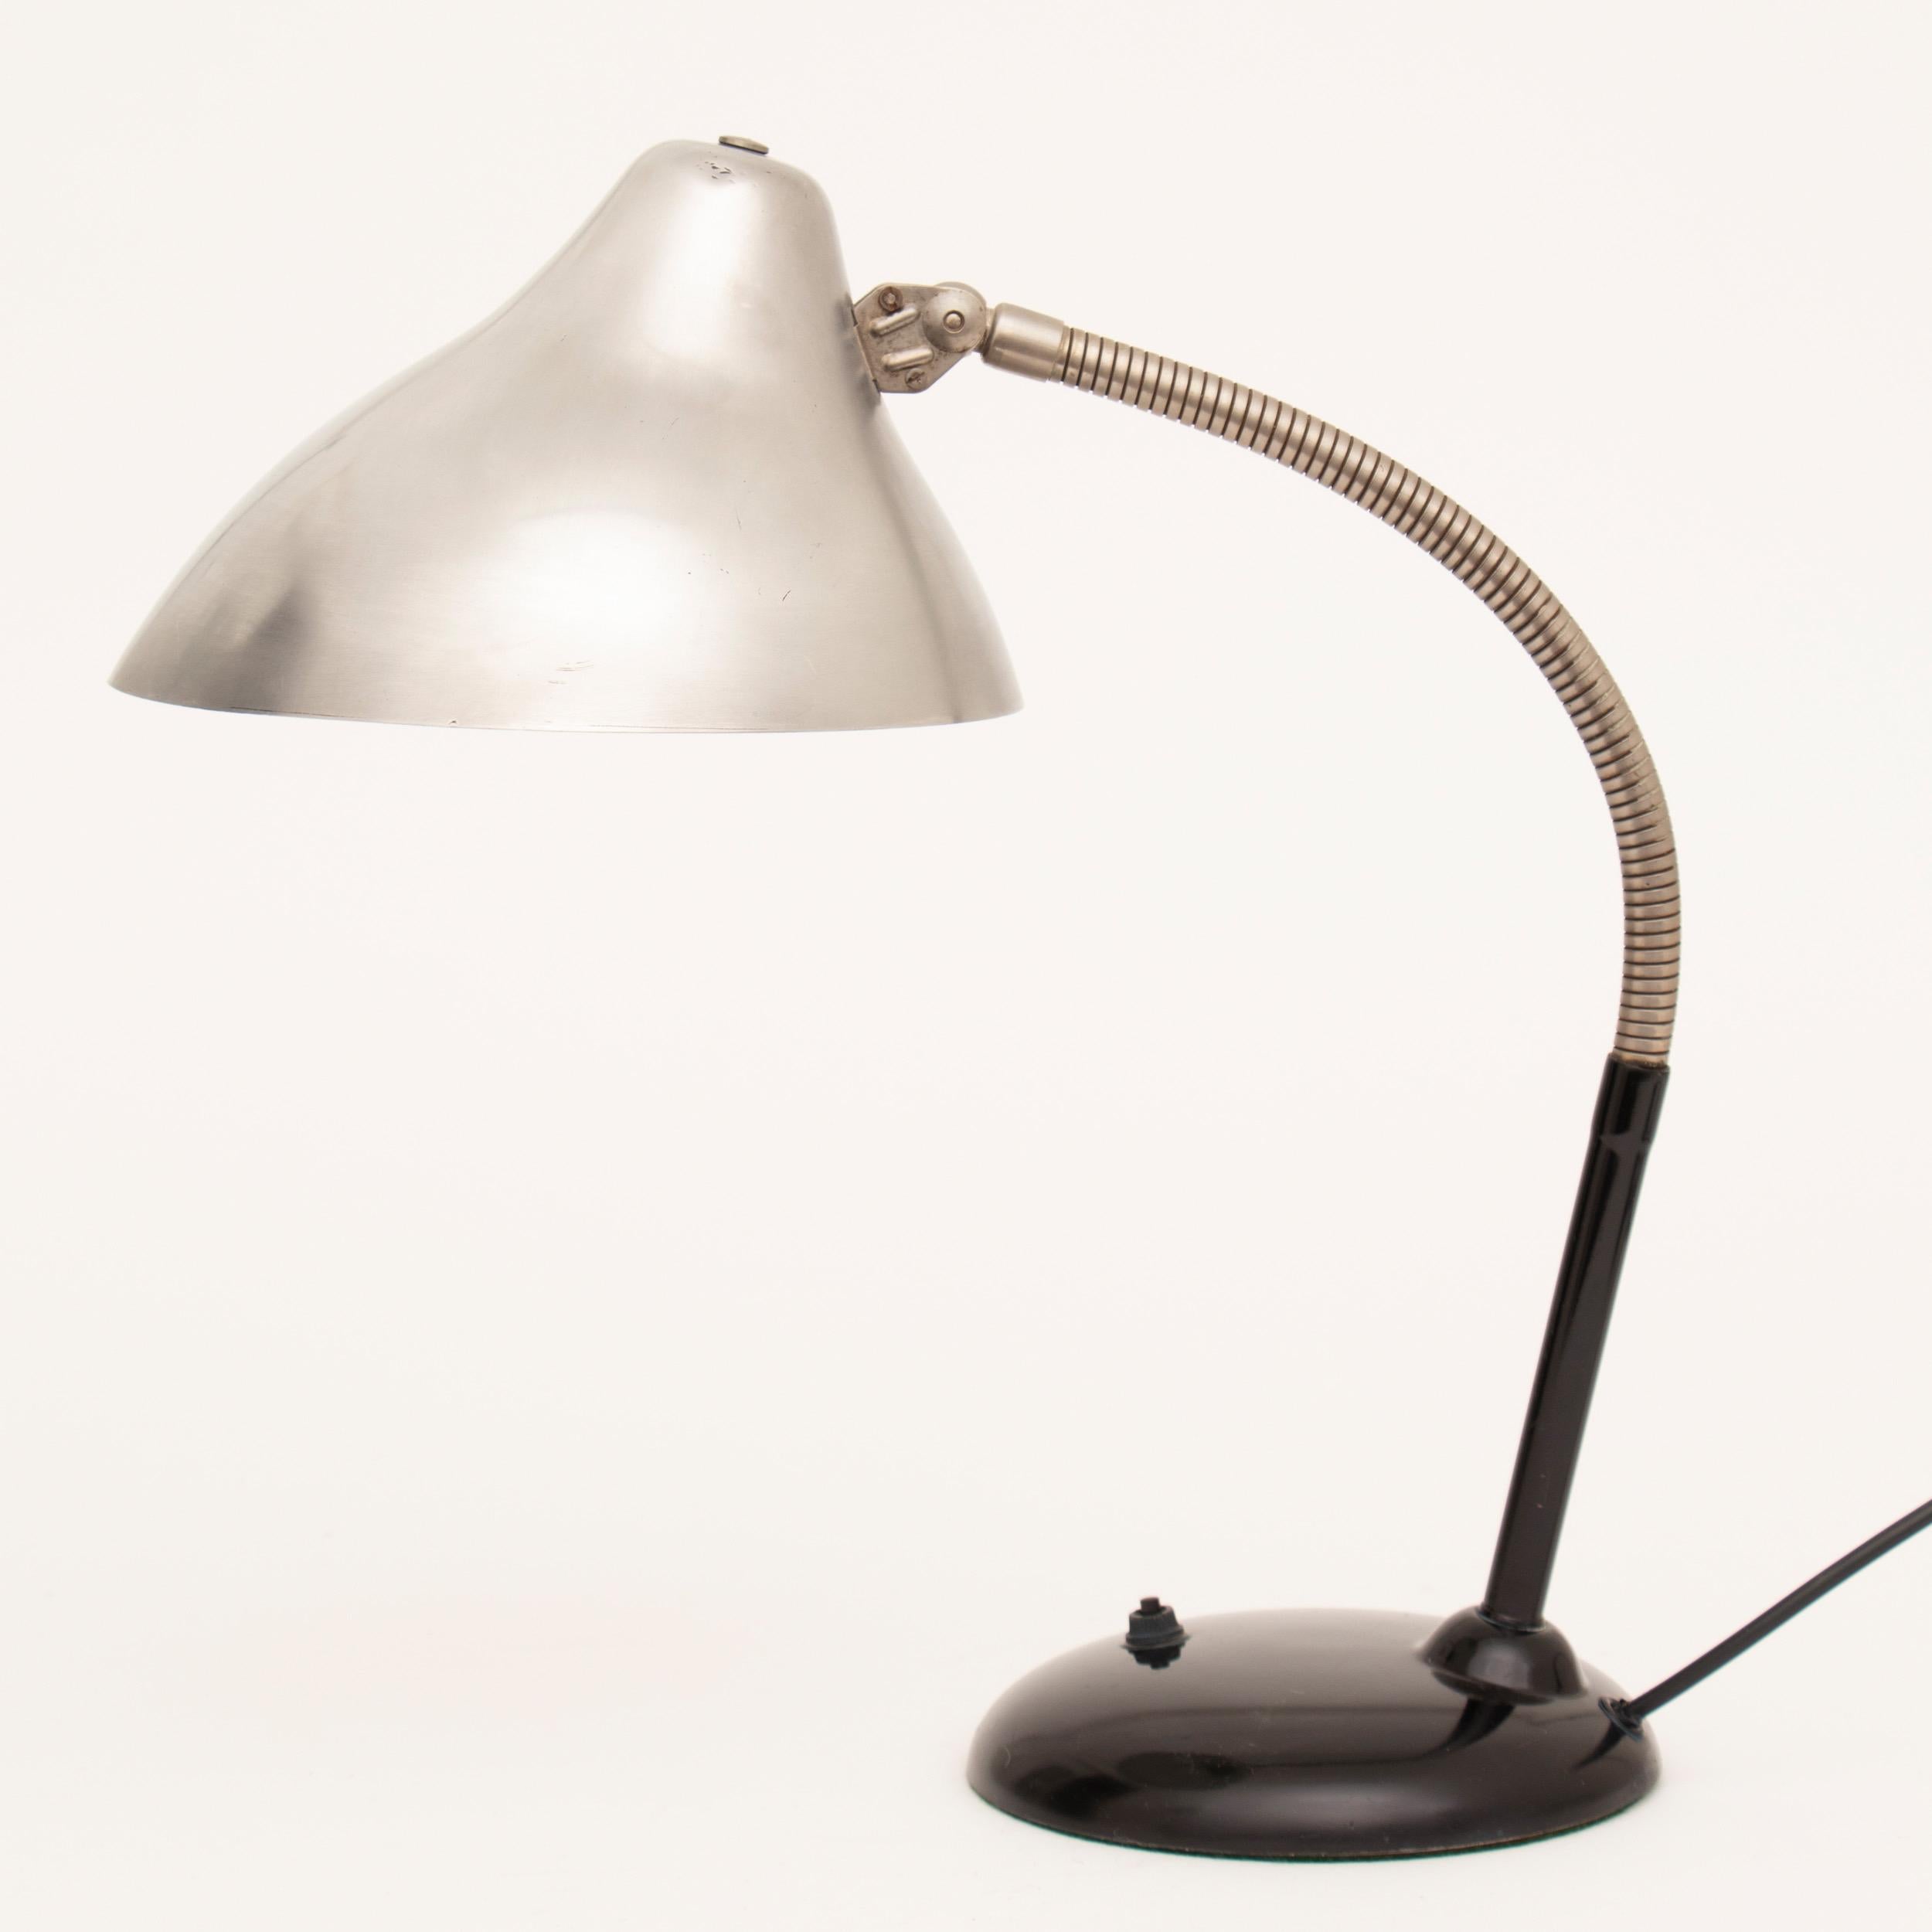 Midcentury desk or table lamp
Painted black metal base with flexible goose neck and piviting aluminium canopy shade
Measures: H 43cm, W 23cm, D 40cm
Germany, circa 1950.